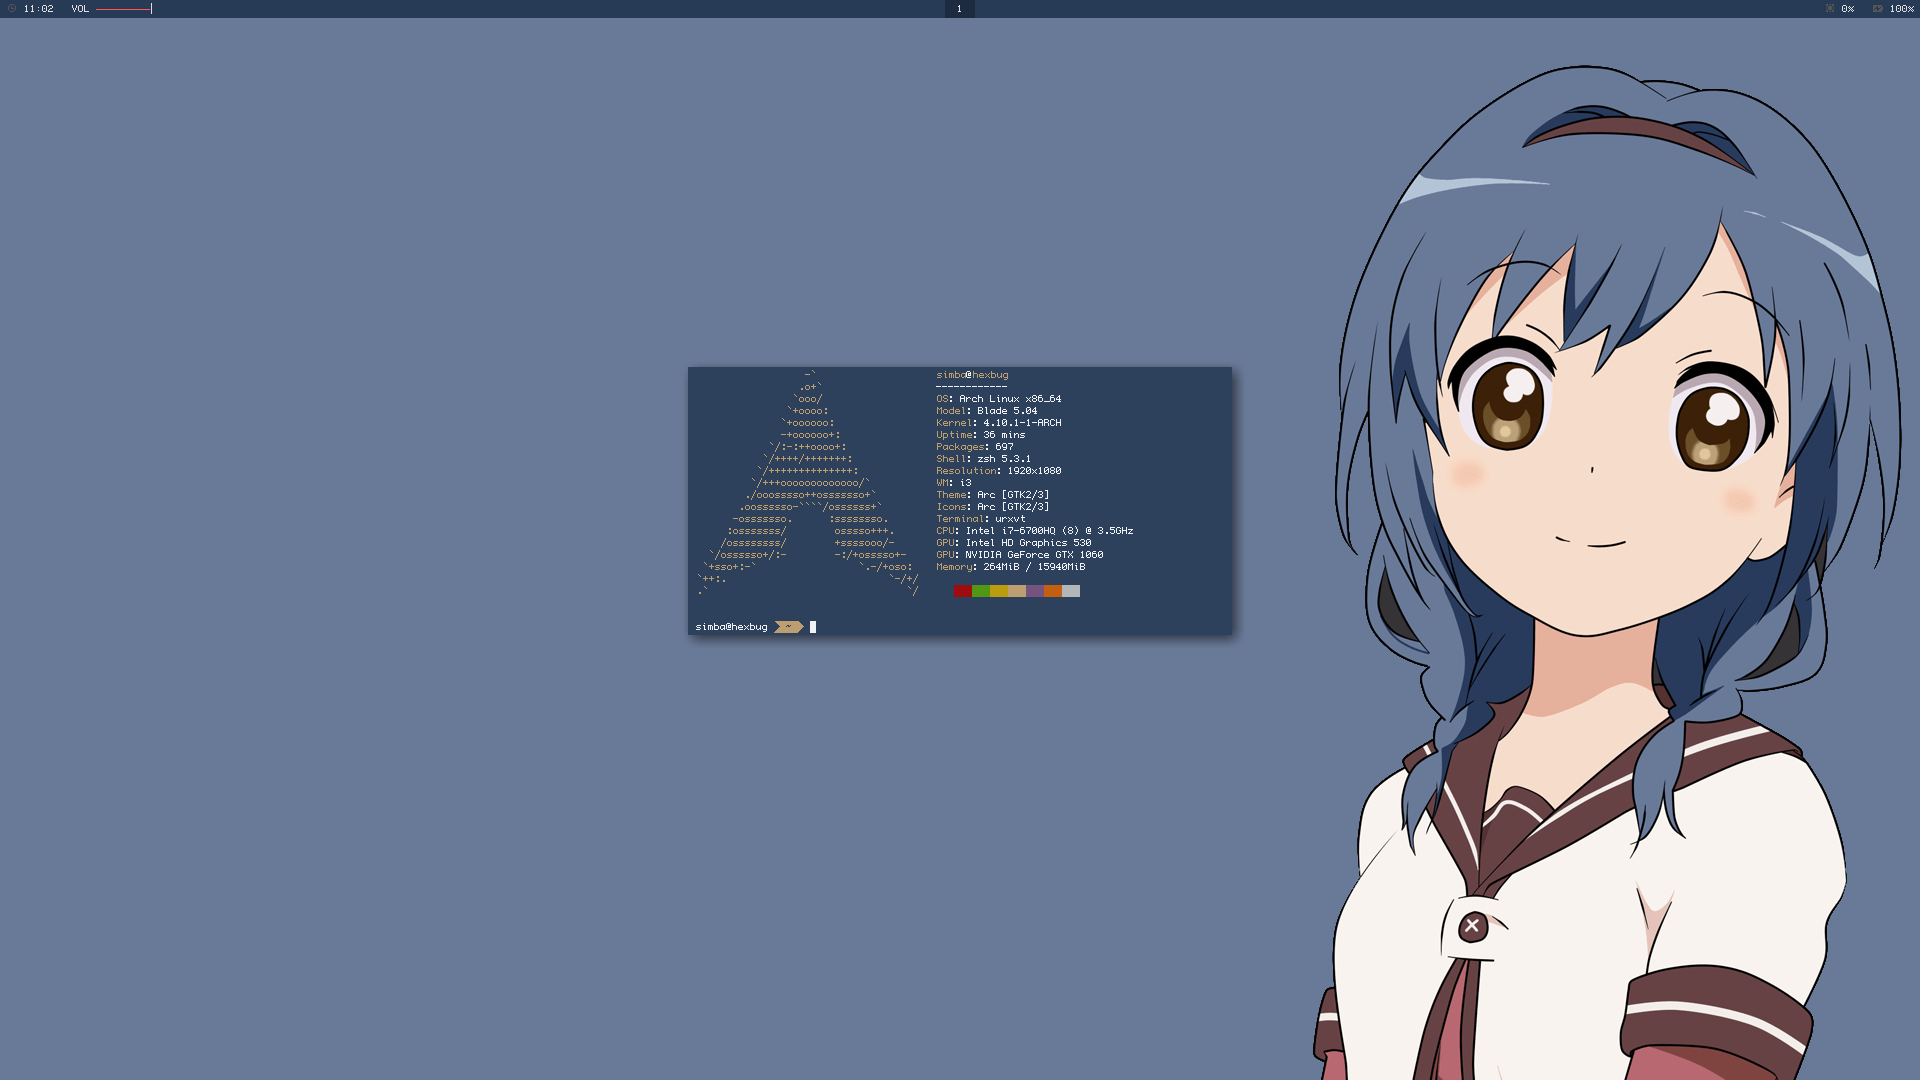 arch linux wallpaper anime